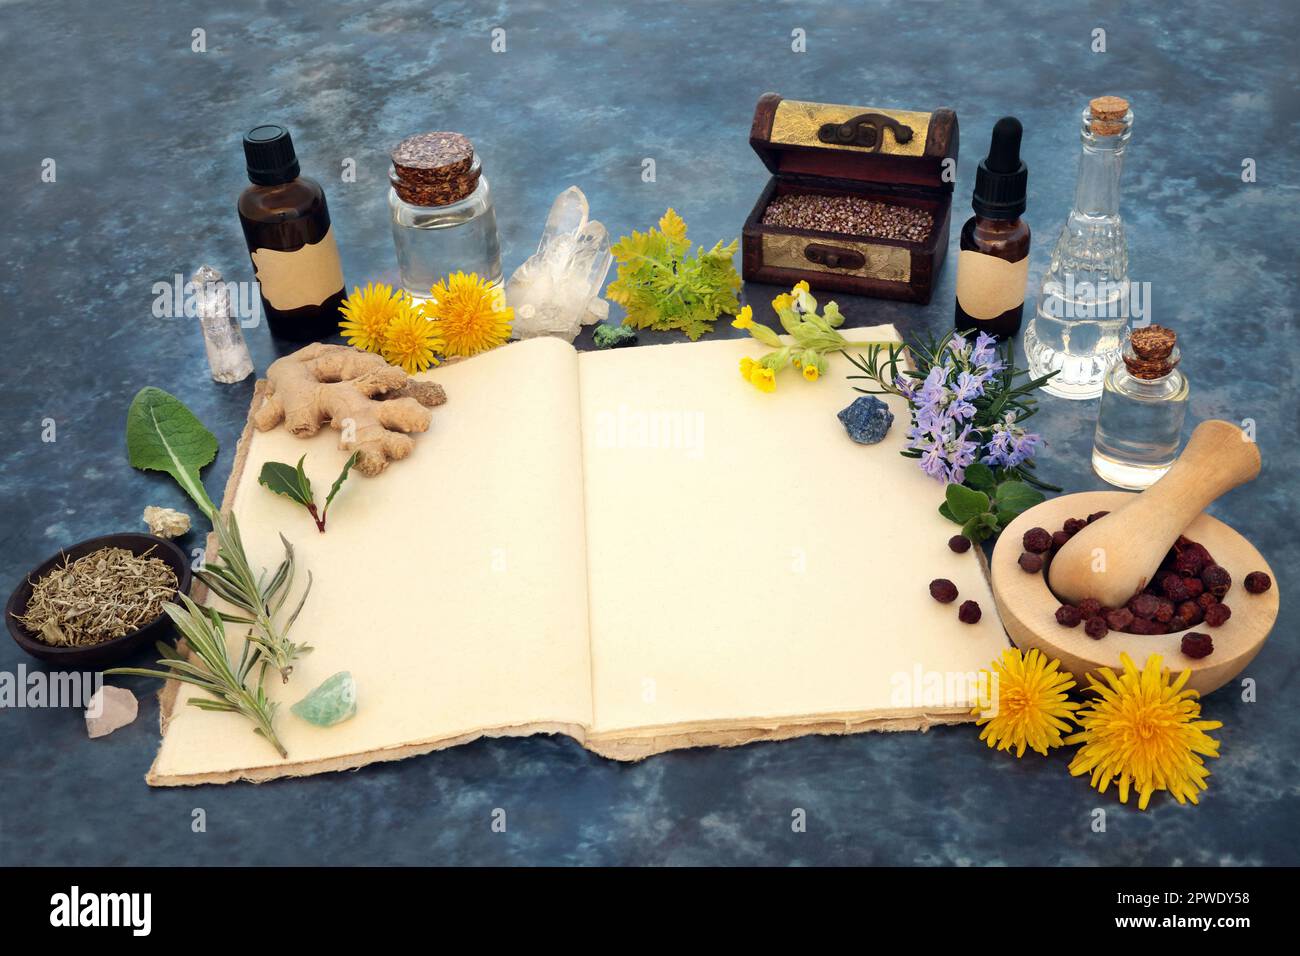 Naturopathic herbal plant medicine for natural healing with hemp recipe book, essential oils, crystals, herbs flowers. Stock Photo